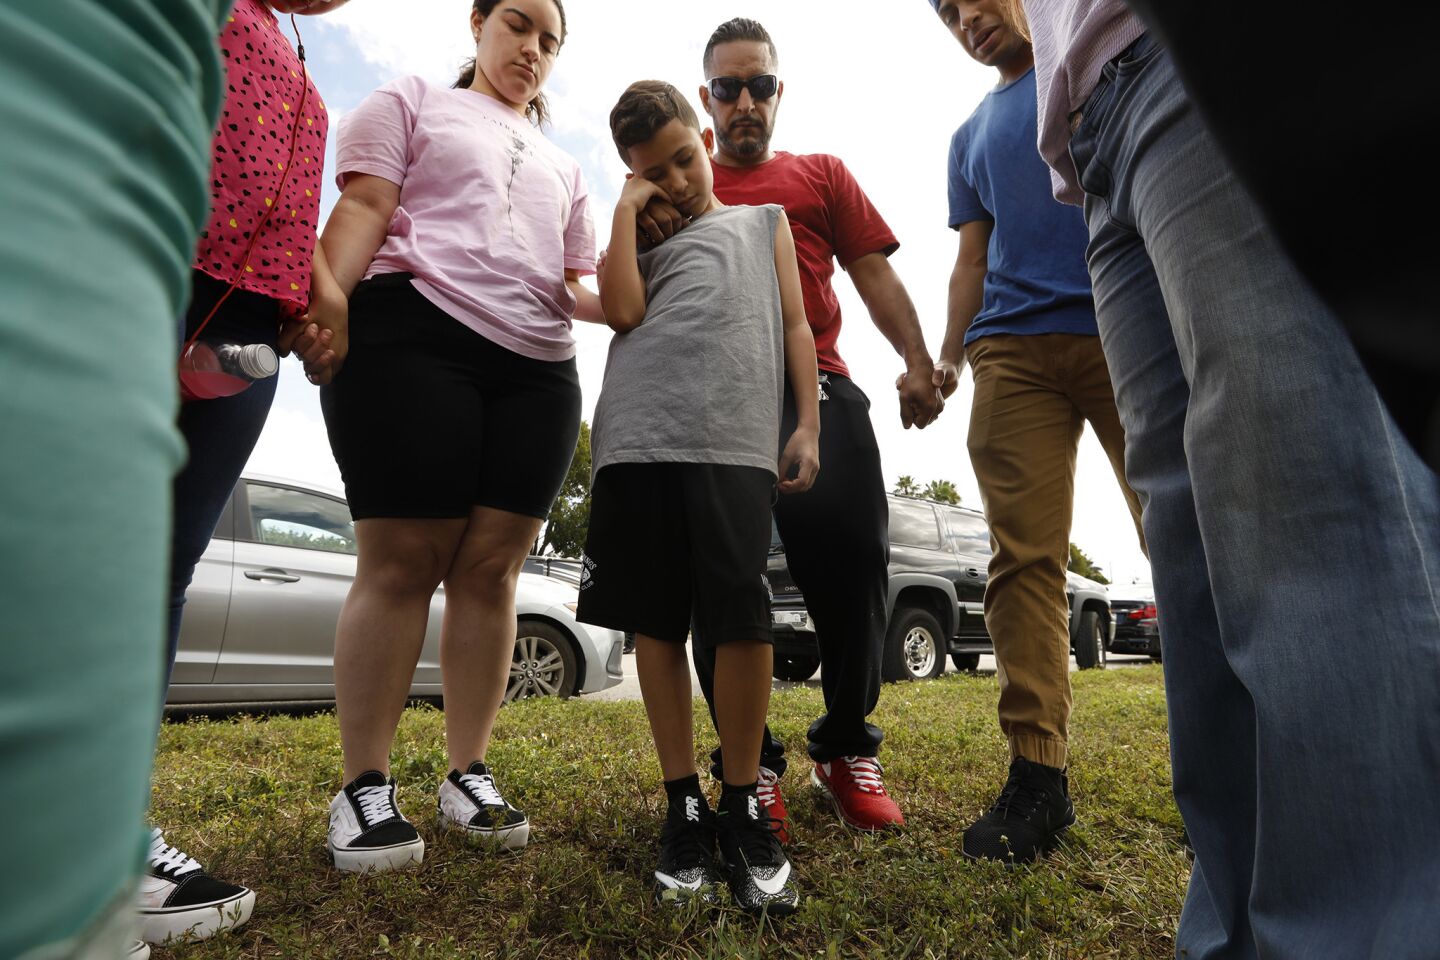 Brandon Sanchez, 9, prays with his father Victor Sanchez, center, of Coral Springs, Fla., along with other family members and friends in front of Marjorie Stoneman Douglas High School on Sunday, Feb. 18, 2018.